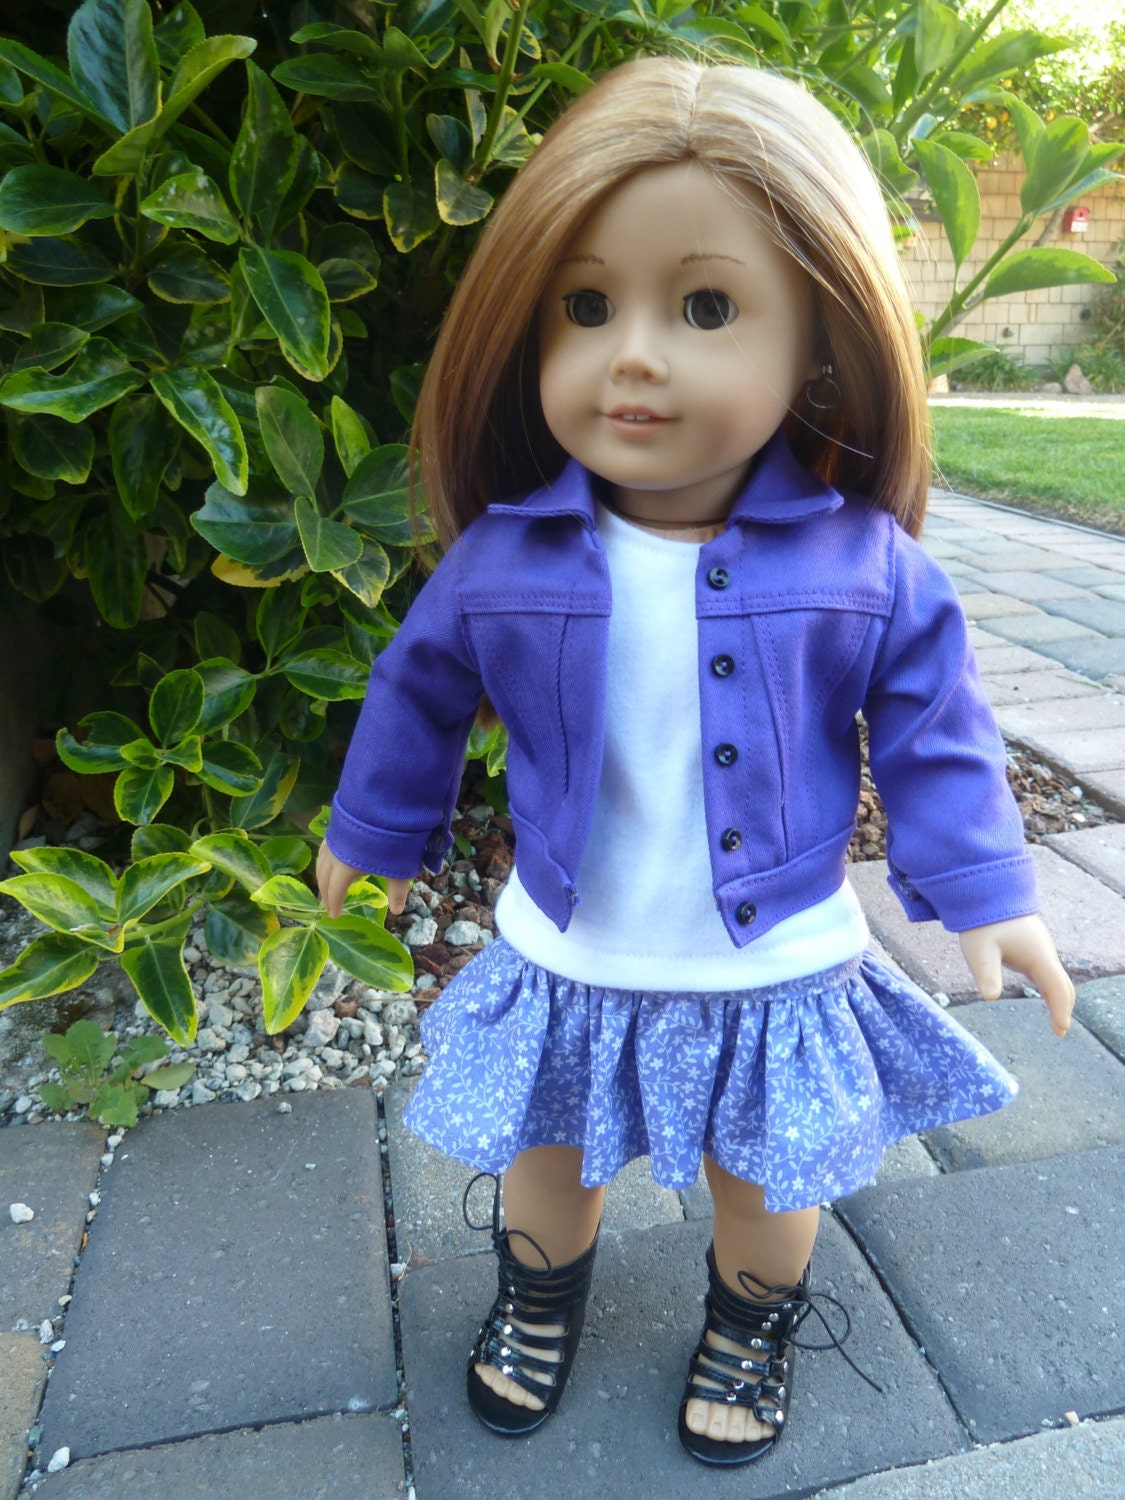 American Girl Doll Clothes - On the Go in Purple 3 piece outfit includes purple denim jacket, tshirt and ruffled skirt